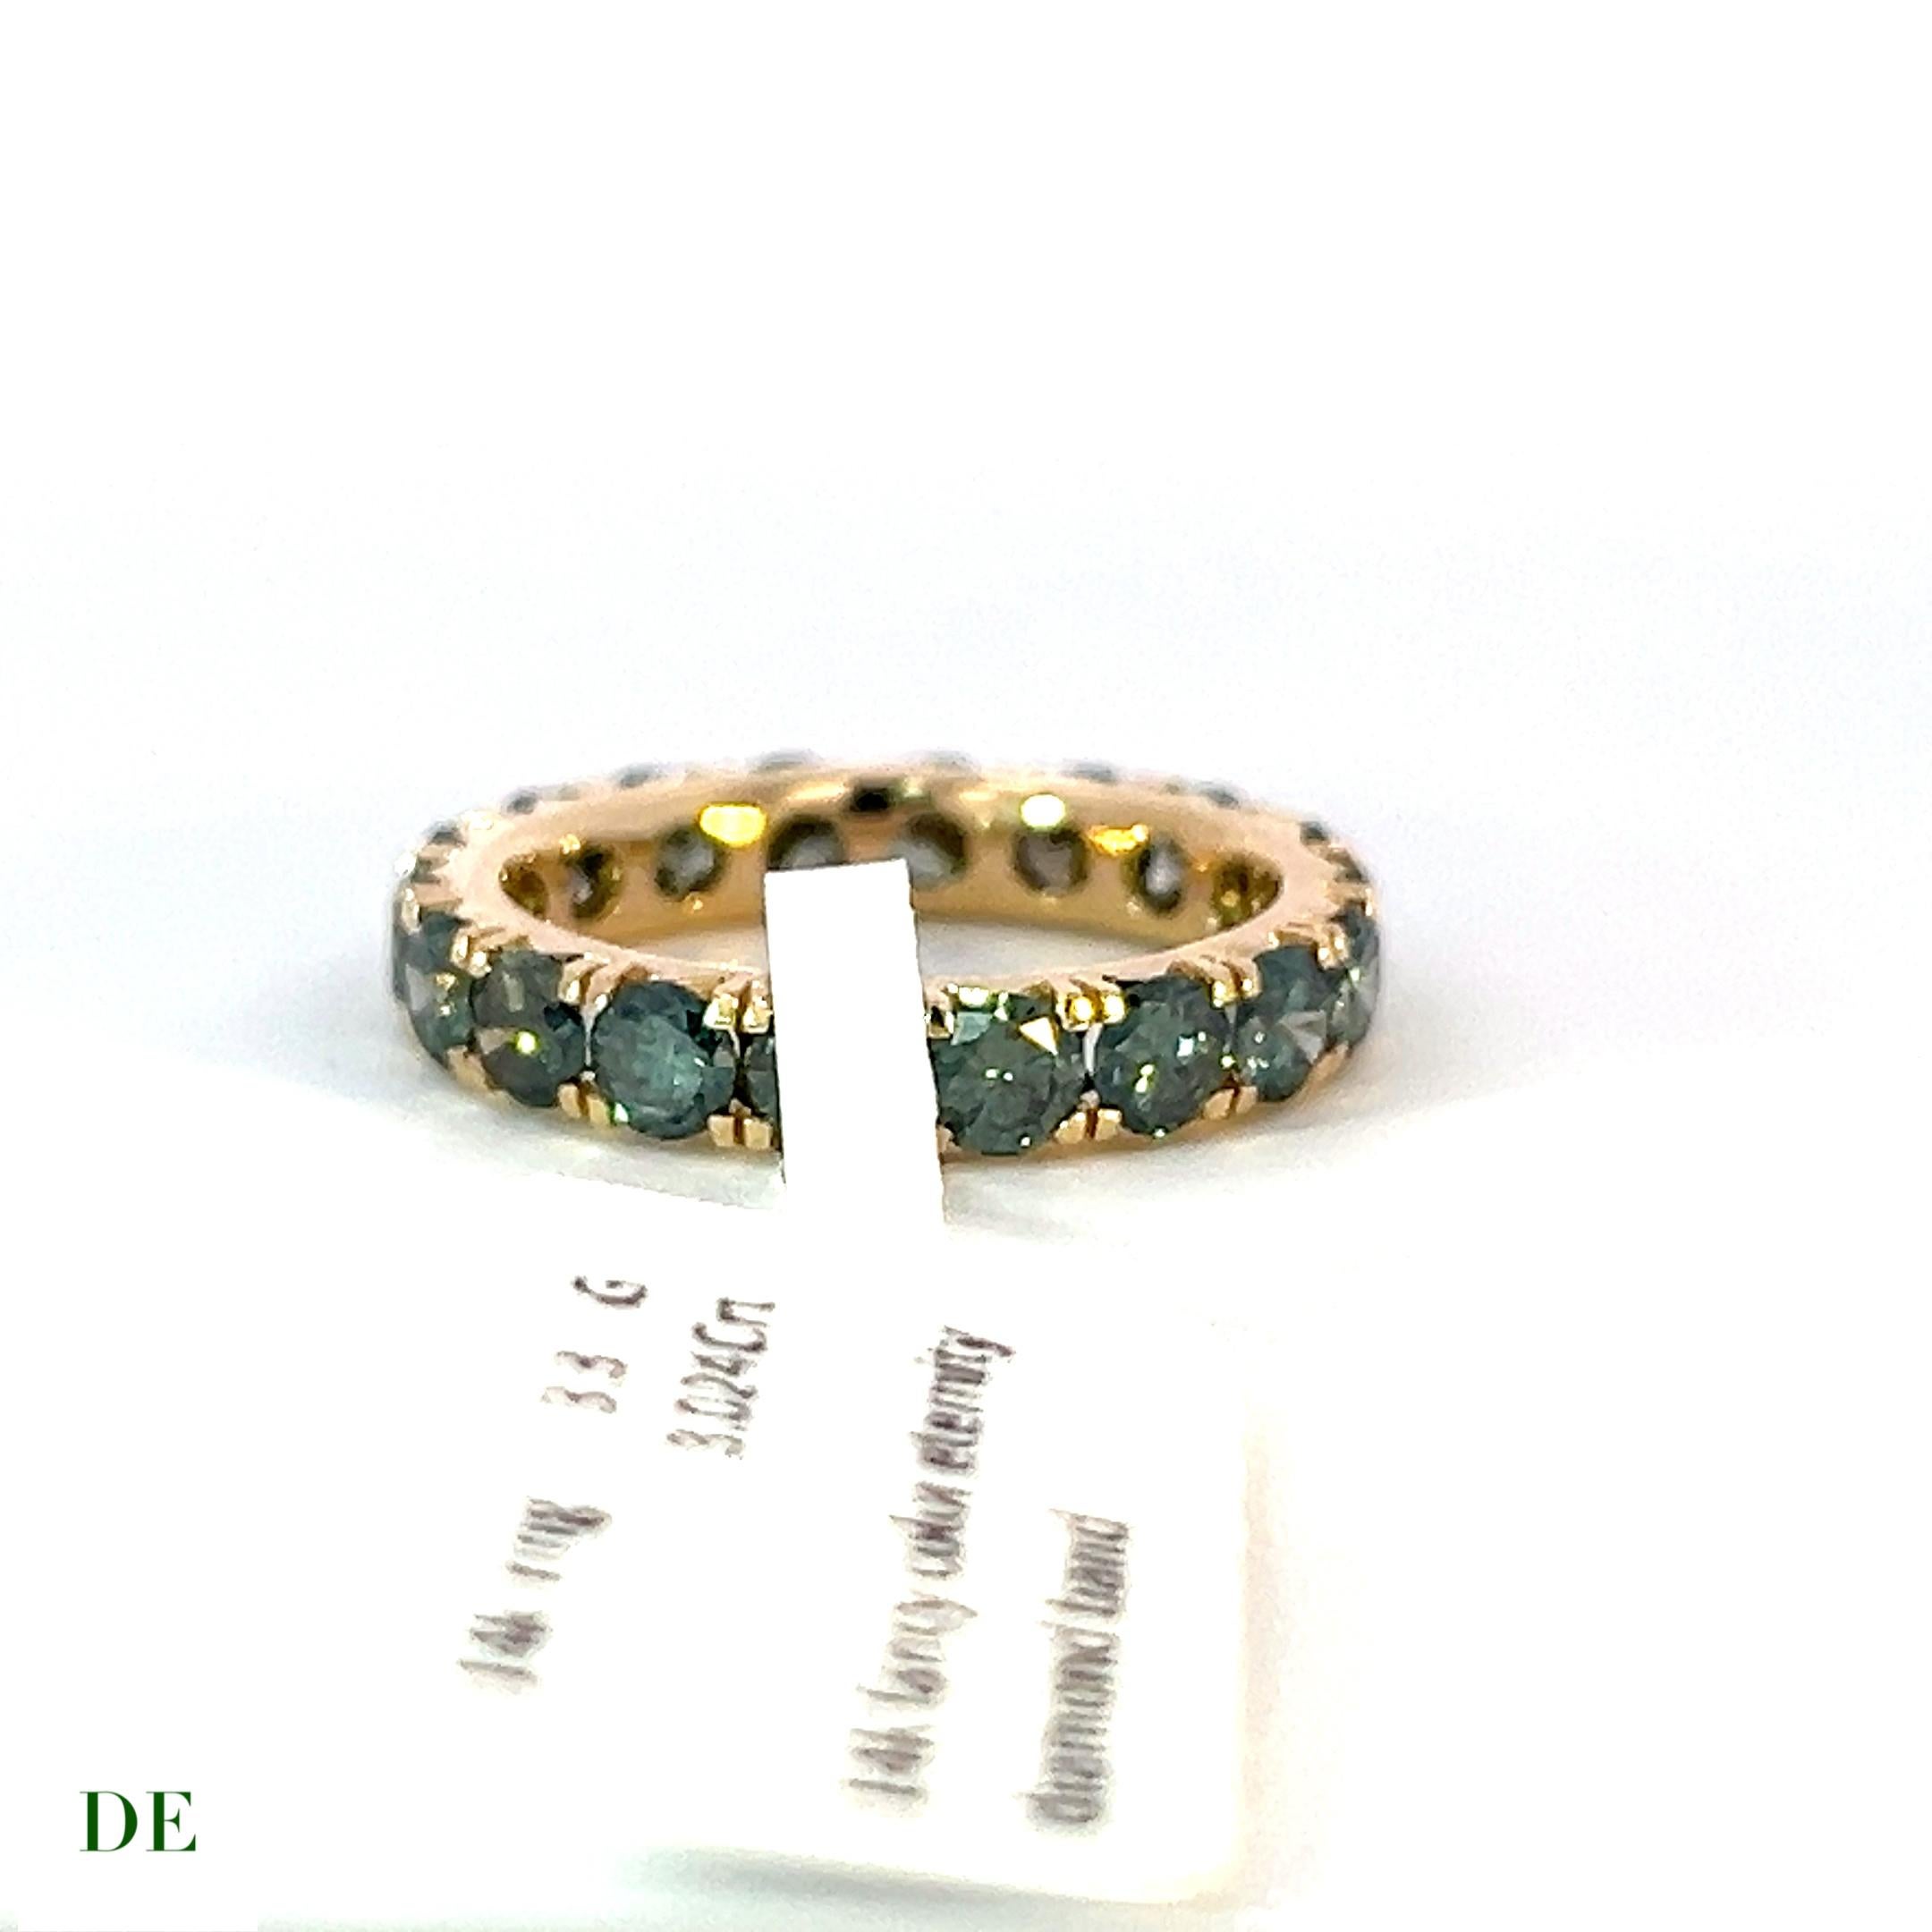 Brilliant Cut Rare Classic 14k Yellow Gold 3.02 Carat Teal Green Diamond Eternity Band Ring For Sale